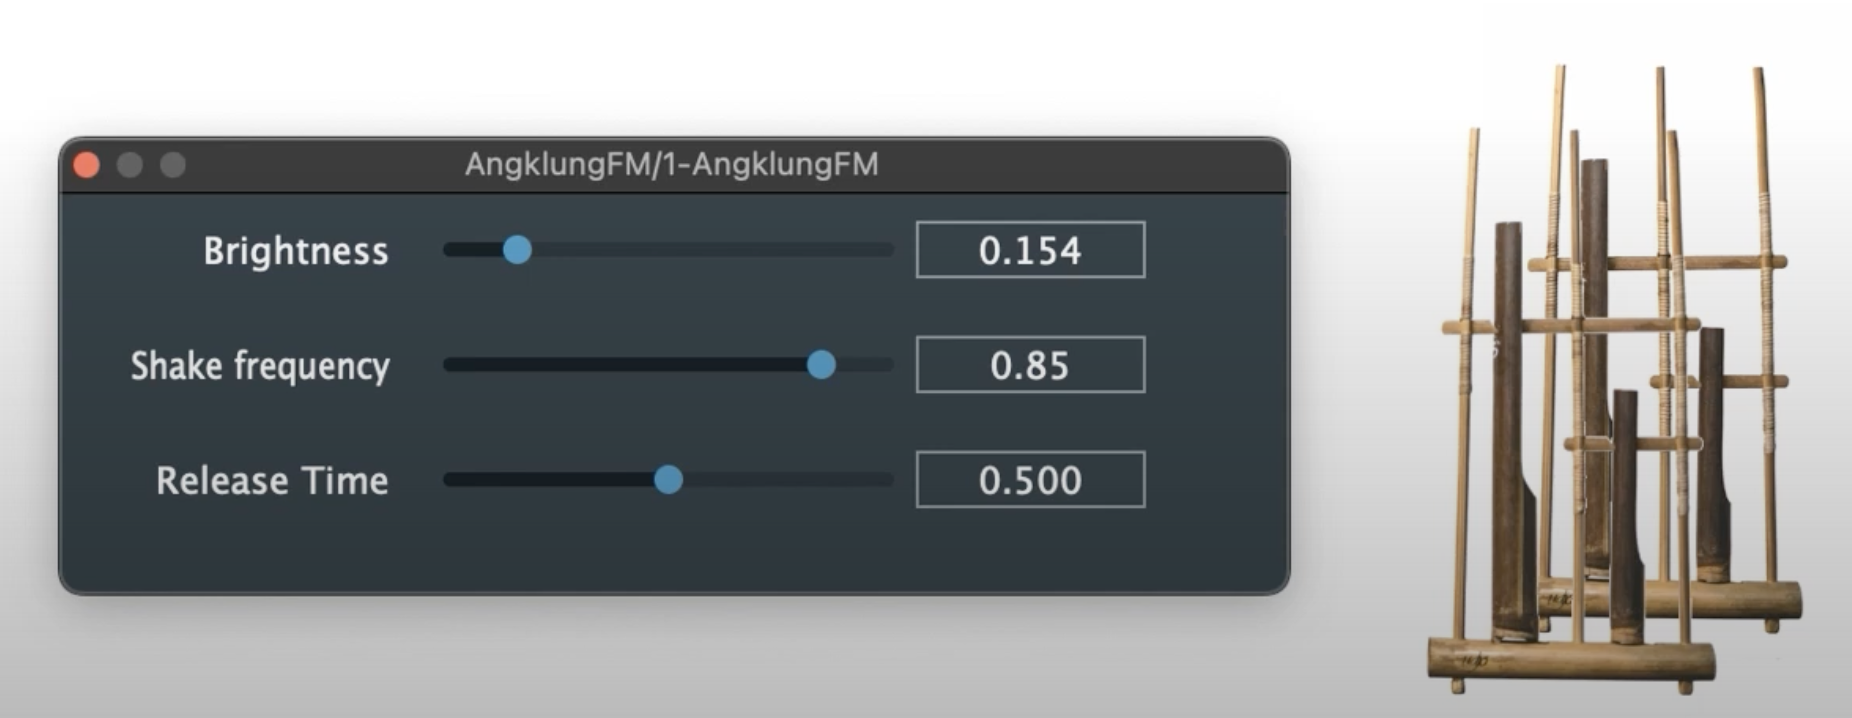 angklungfm.png